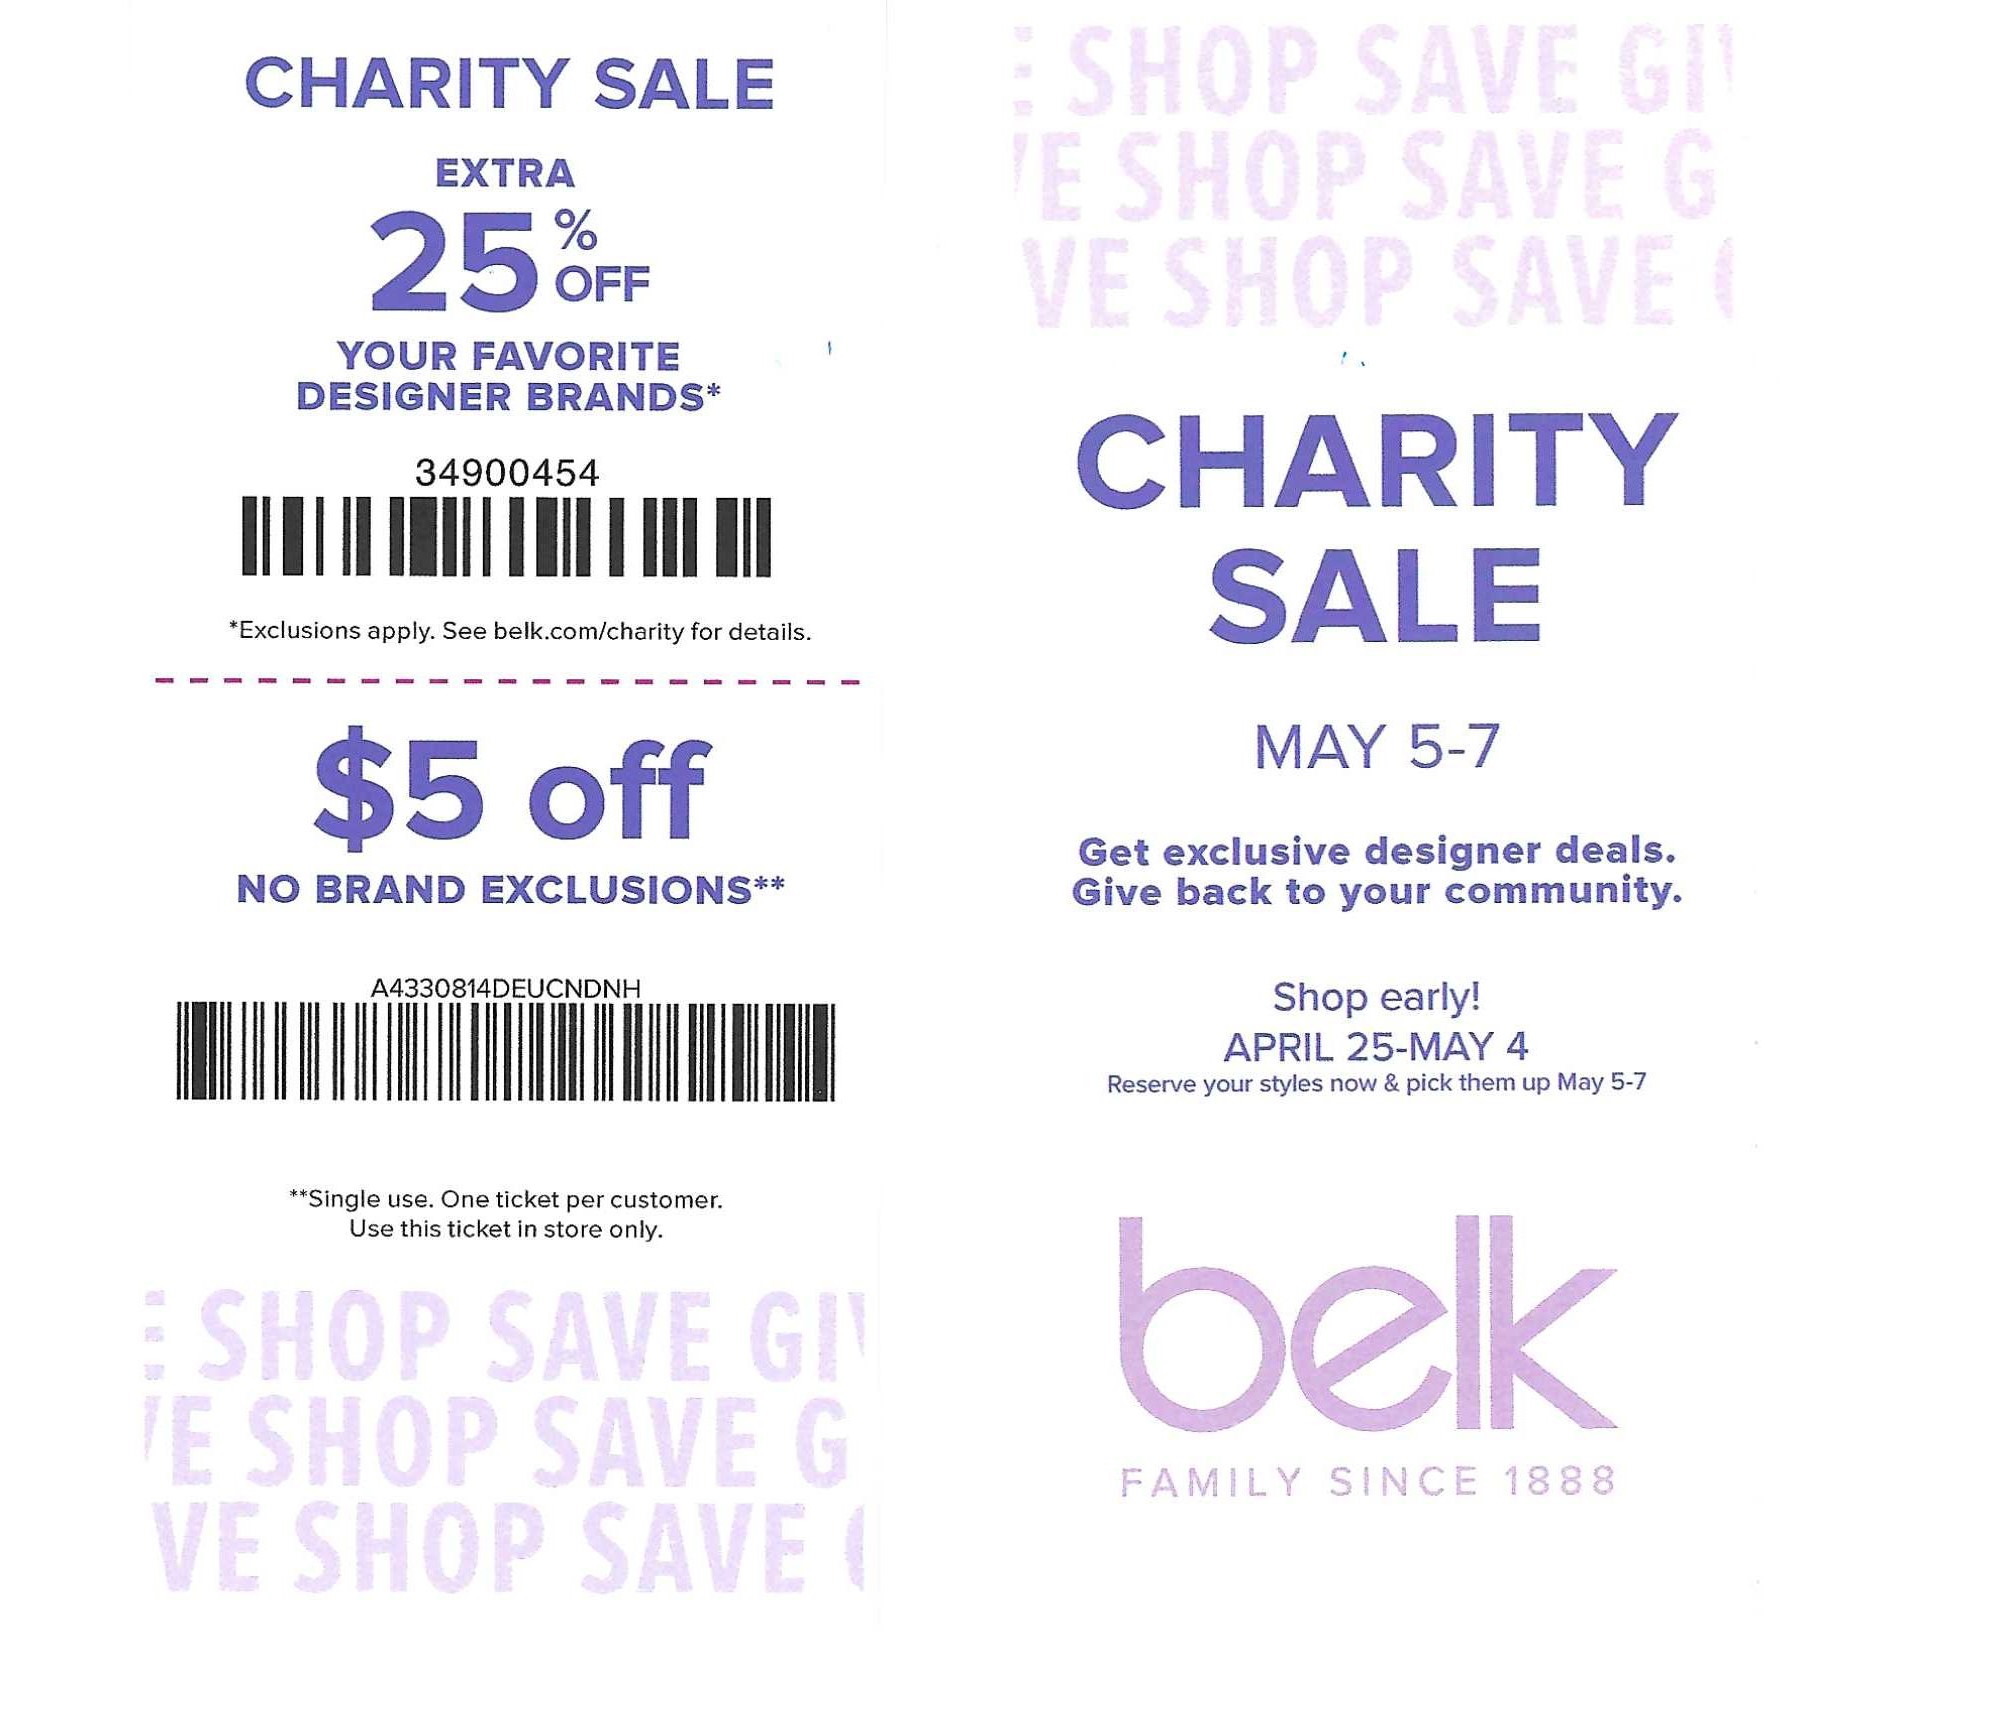 Belk Charity Sale Coupons Maryville Lions Club